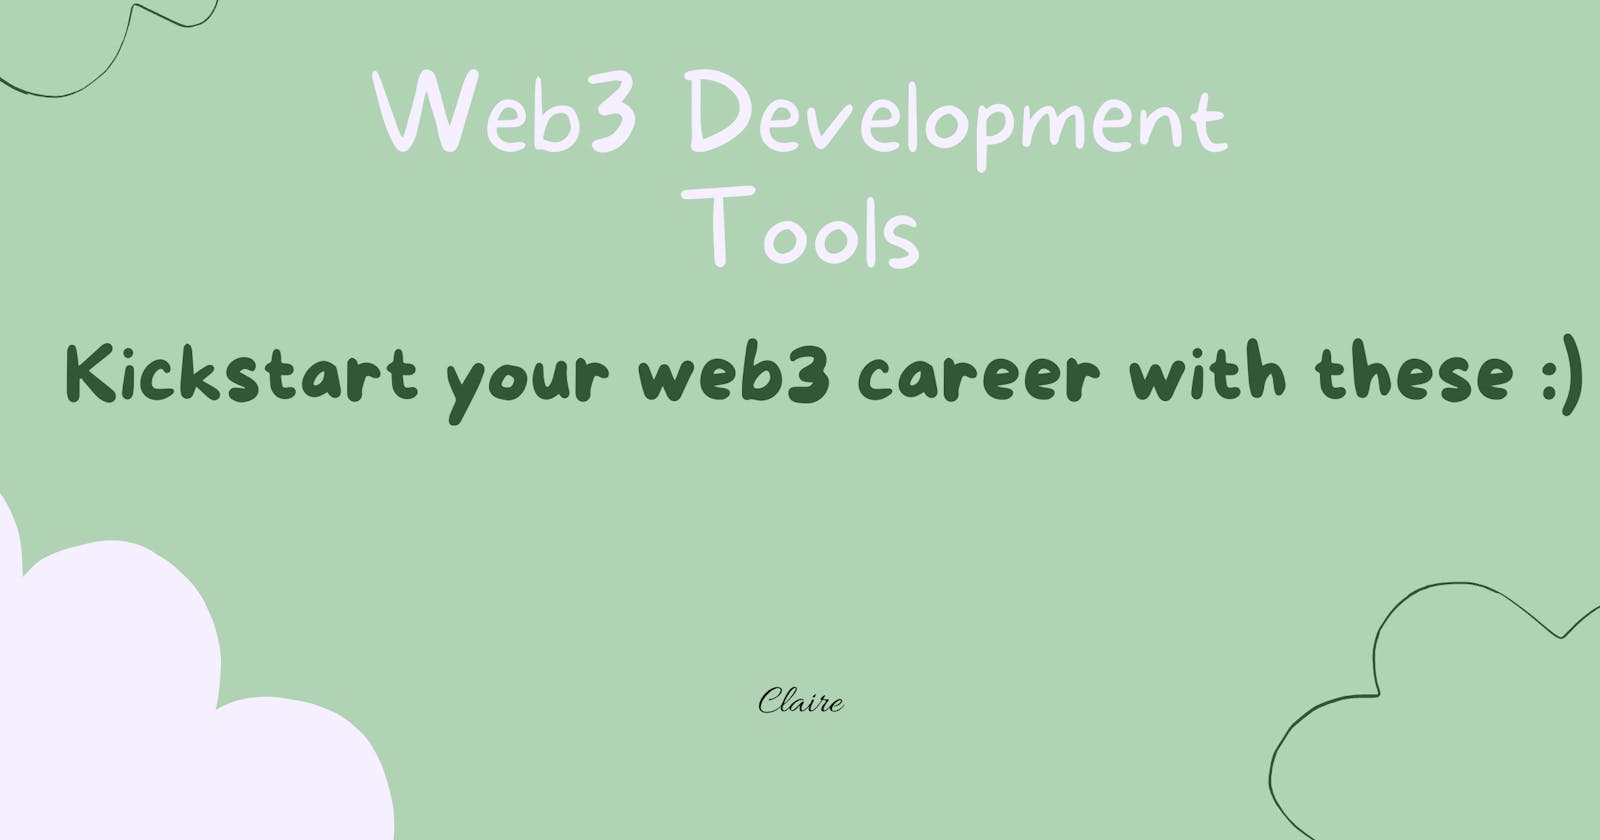 Web3 Development Tools: Kickstart your career with these :)